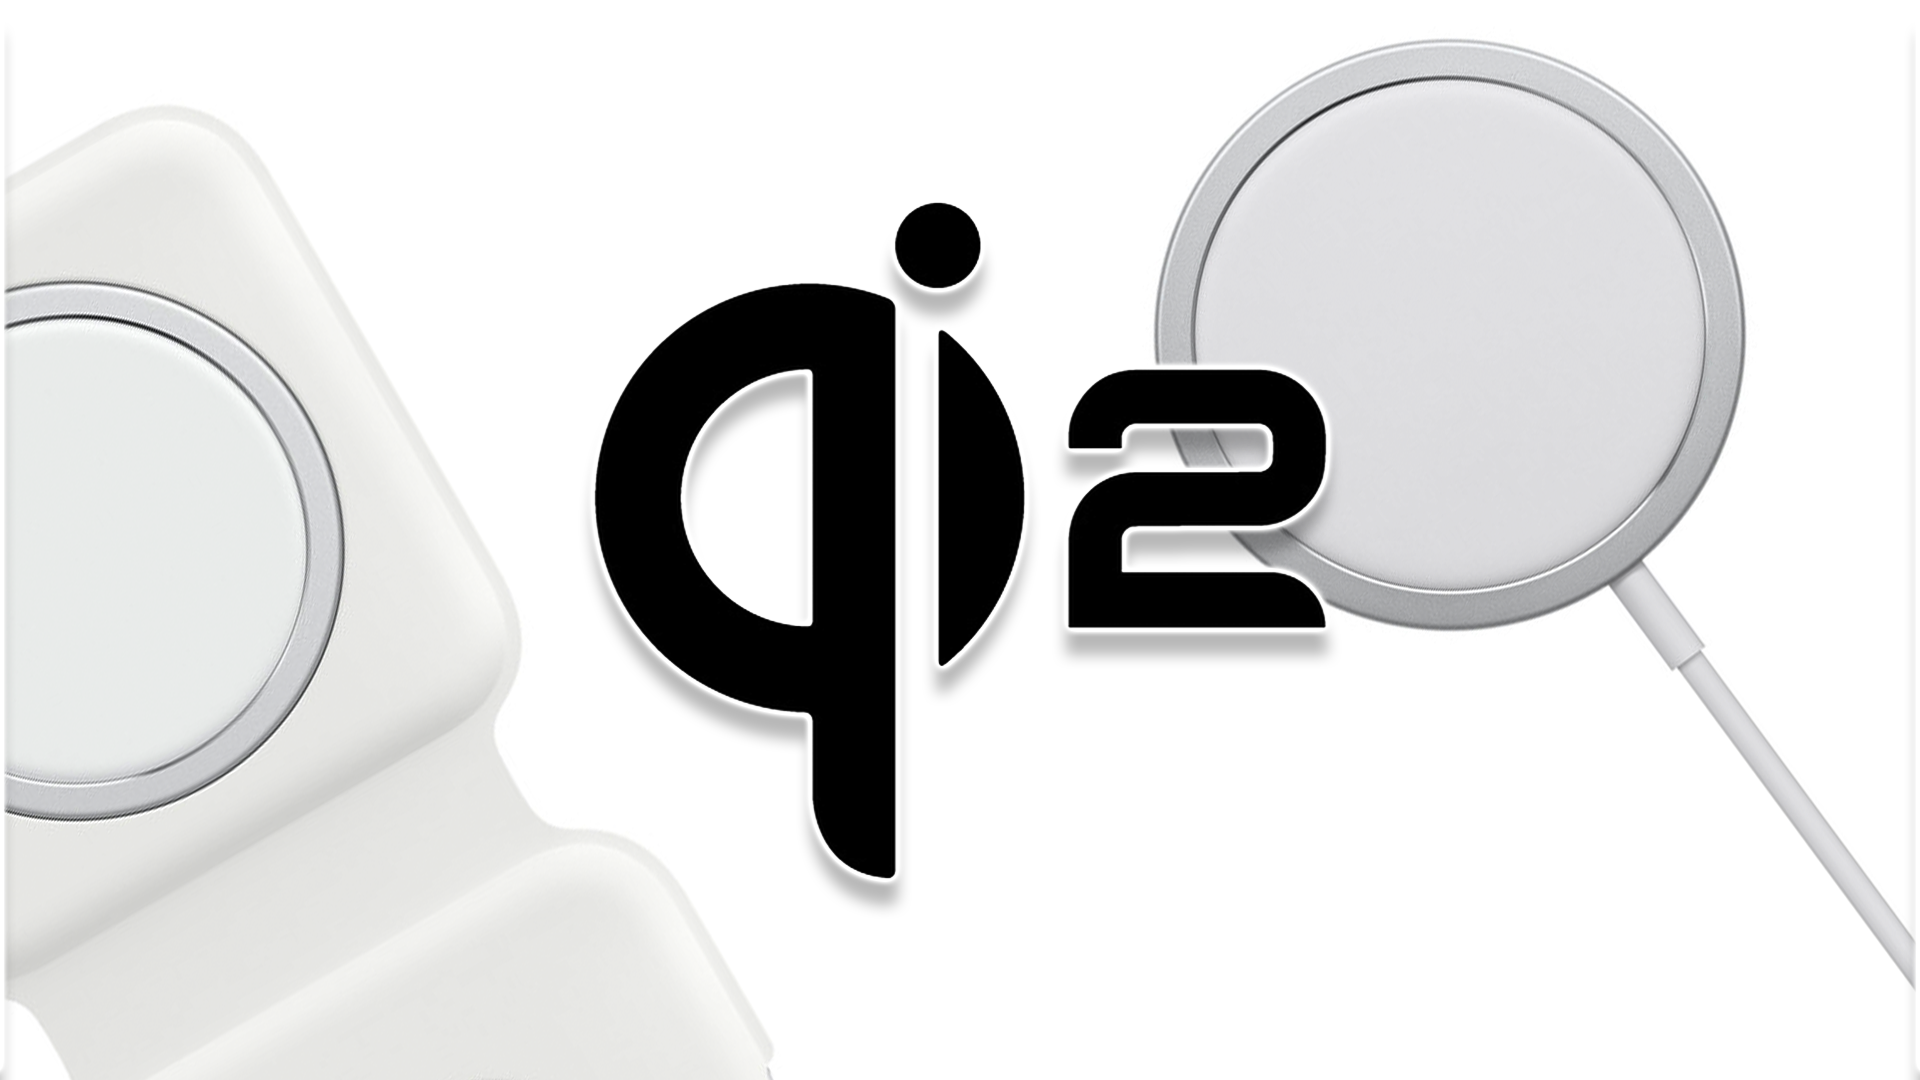 The Qi2 logo over Apple MagSafe chargers.